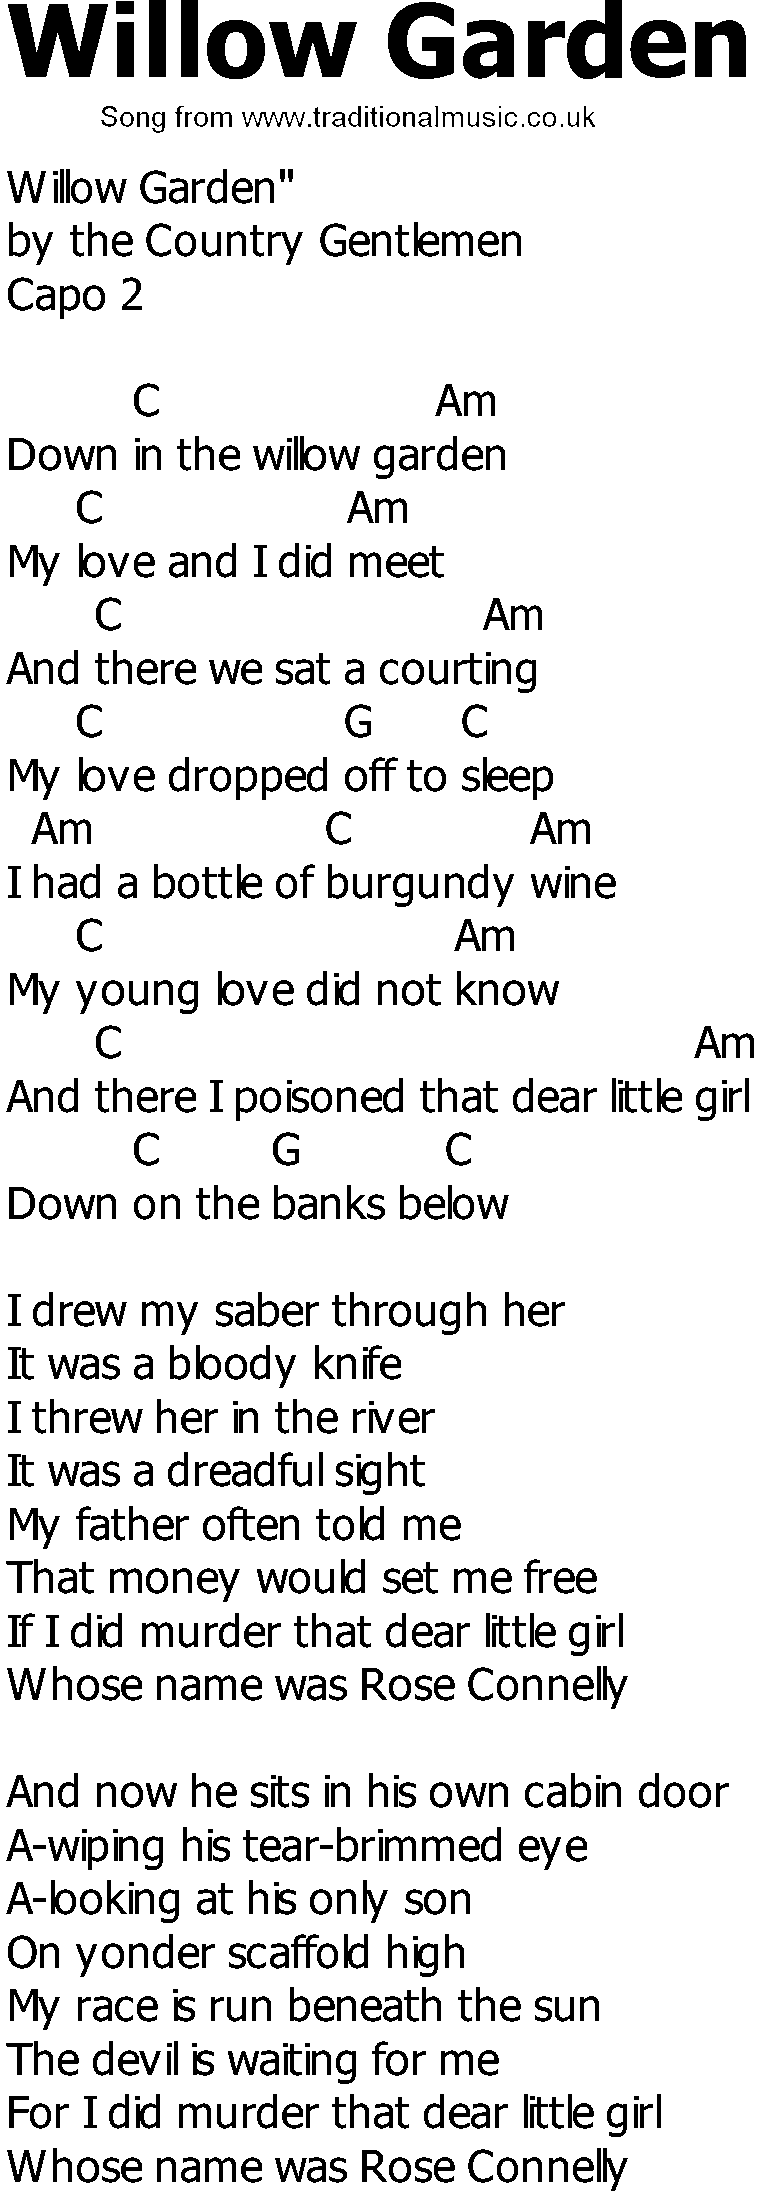 Old Country Song Lyrics With Chords Willow Garden